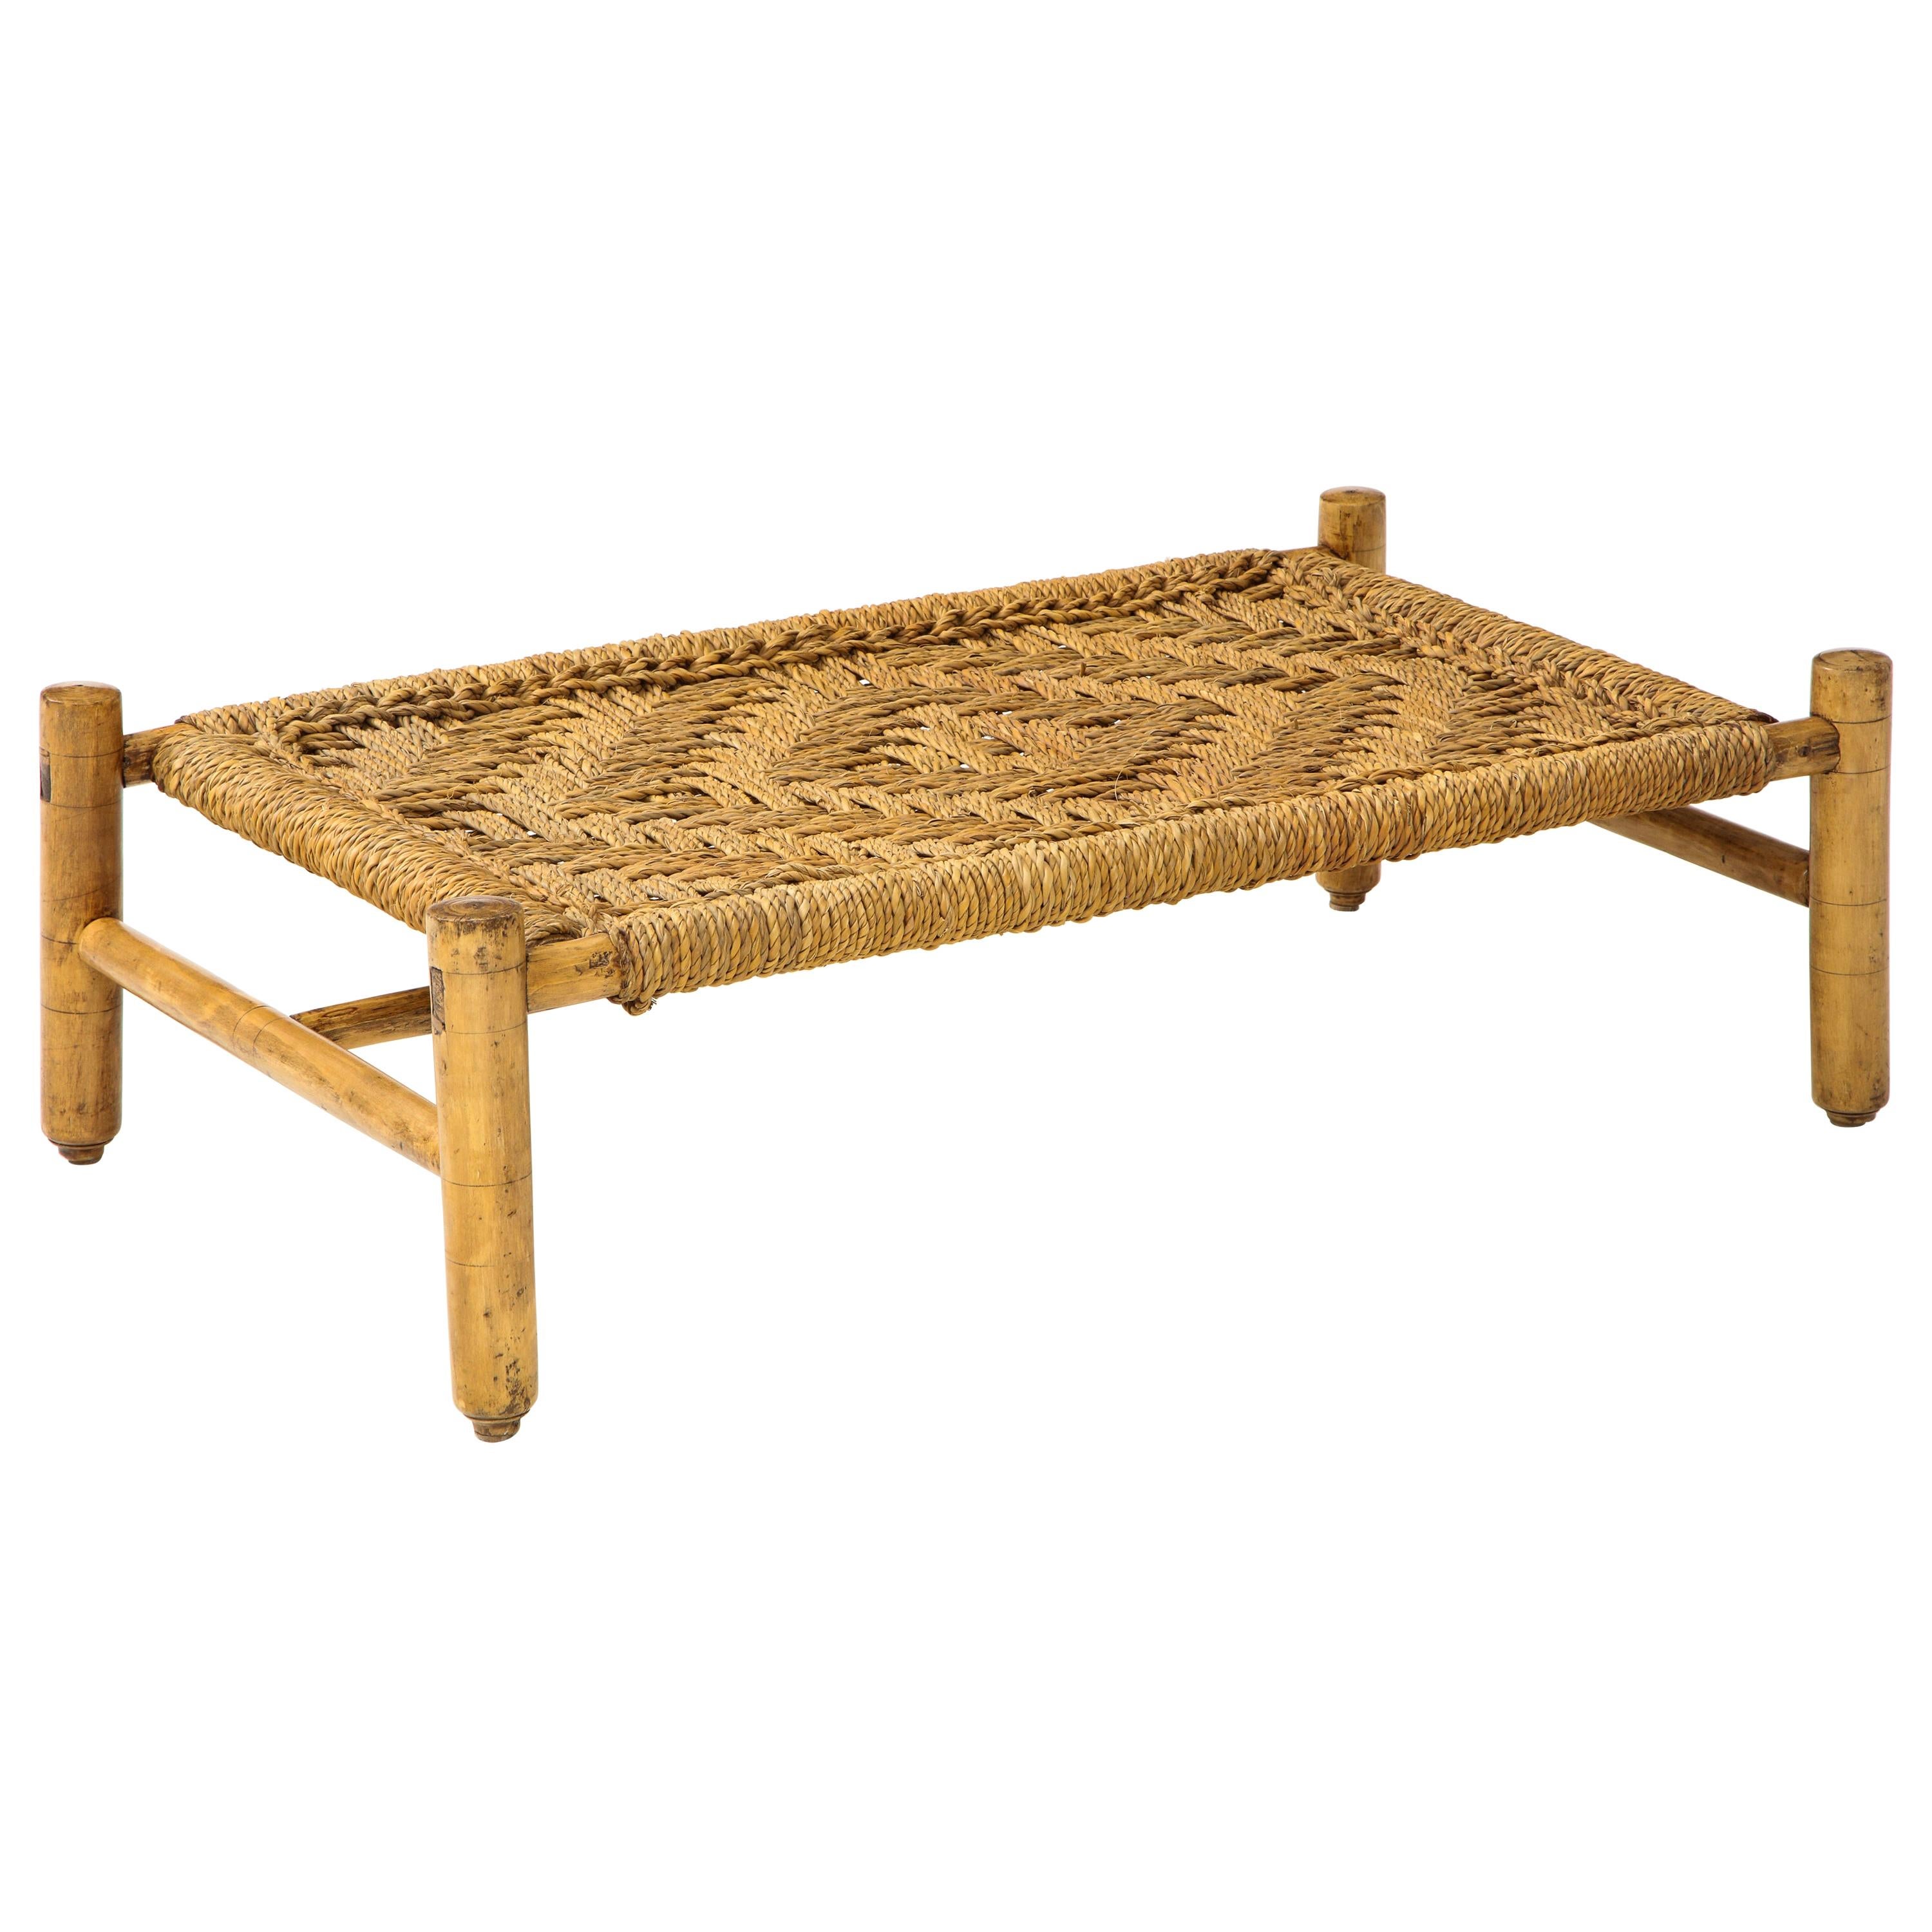 Audoux & Minet Woven Rope and Wood Coffee Table or Bench